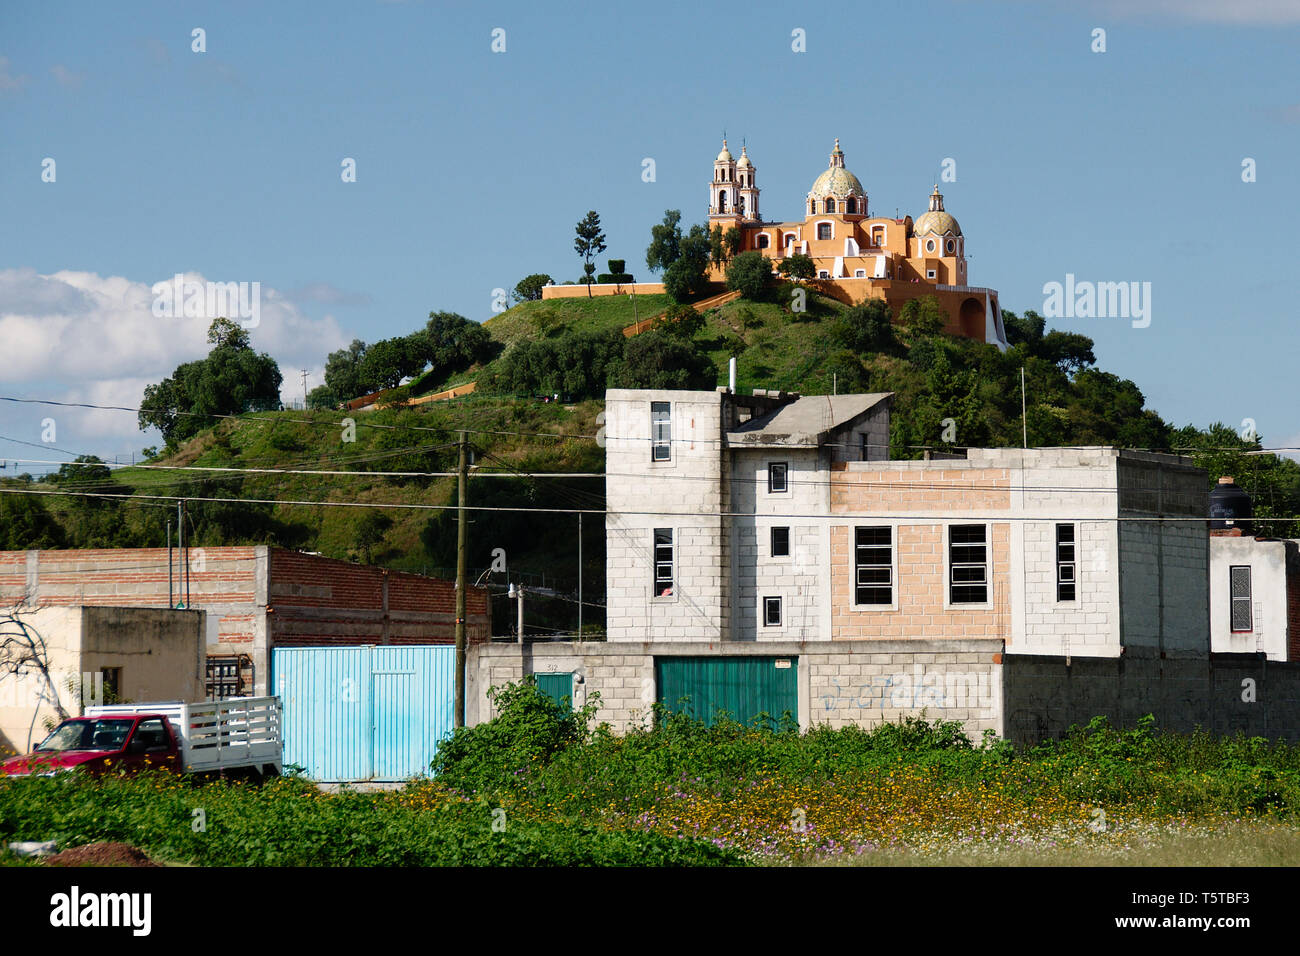 Cholula, Puebla, Mexico - 2019: Panoramic view of the Great Pyramid of Cholula, with the Nuestra Señora de los Remedios church on top. Stock Photo